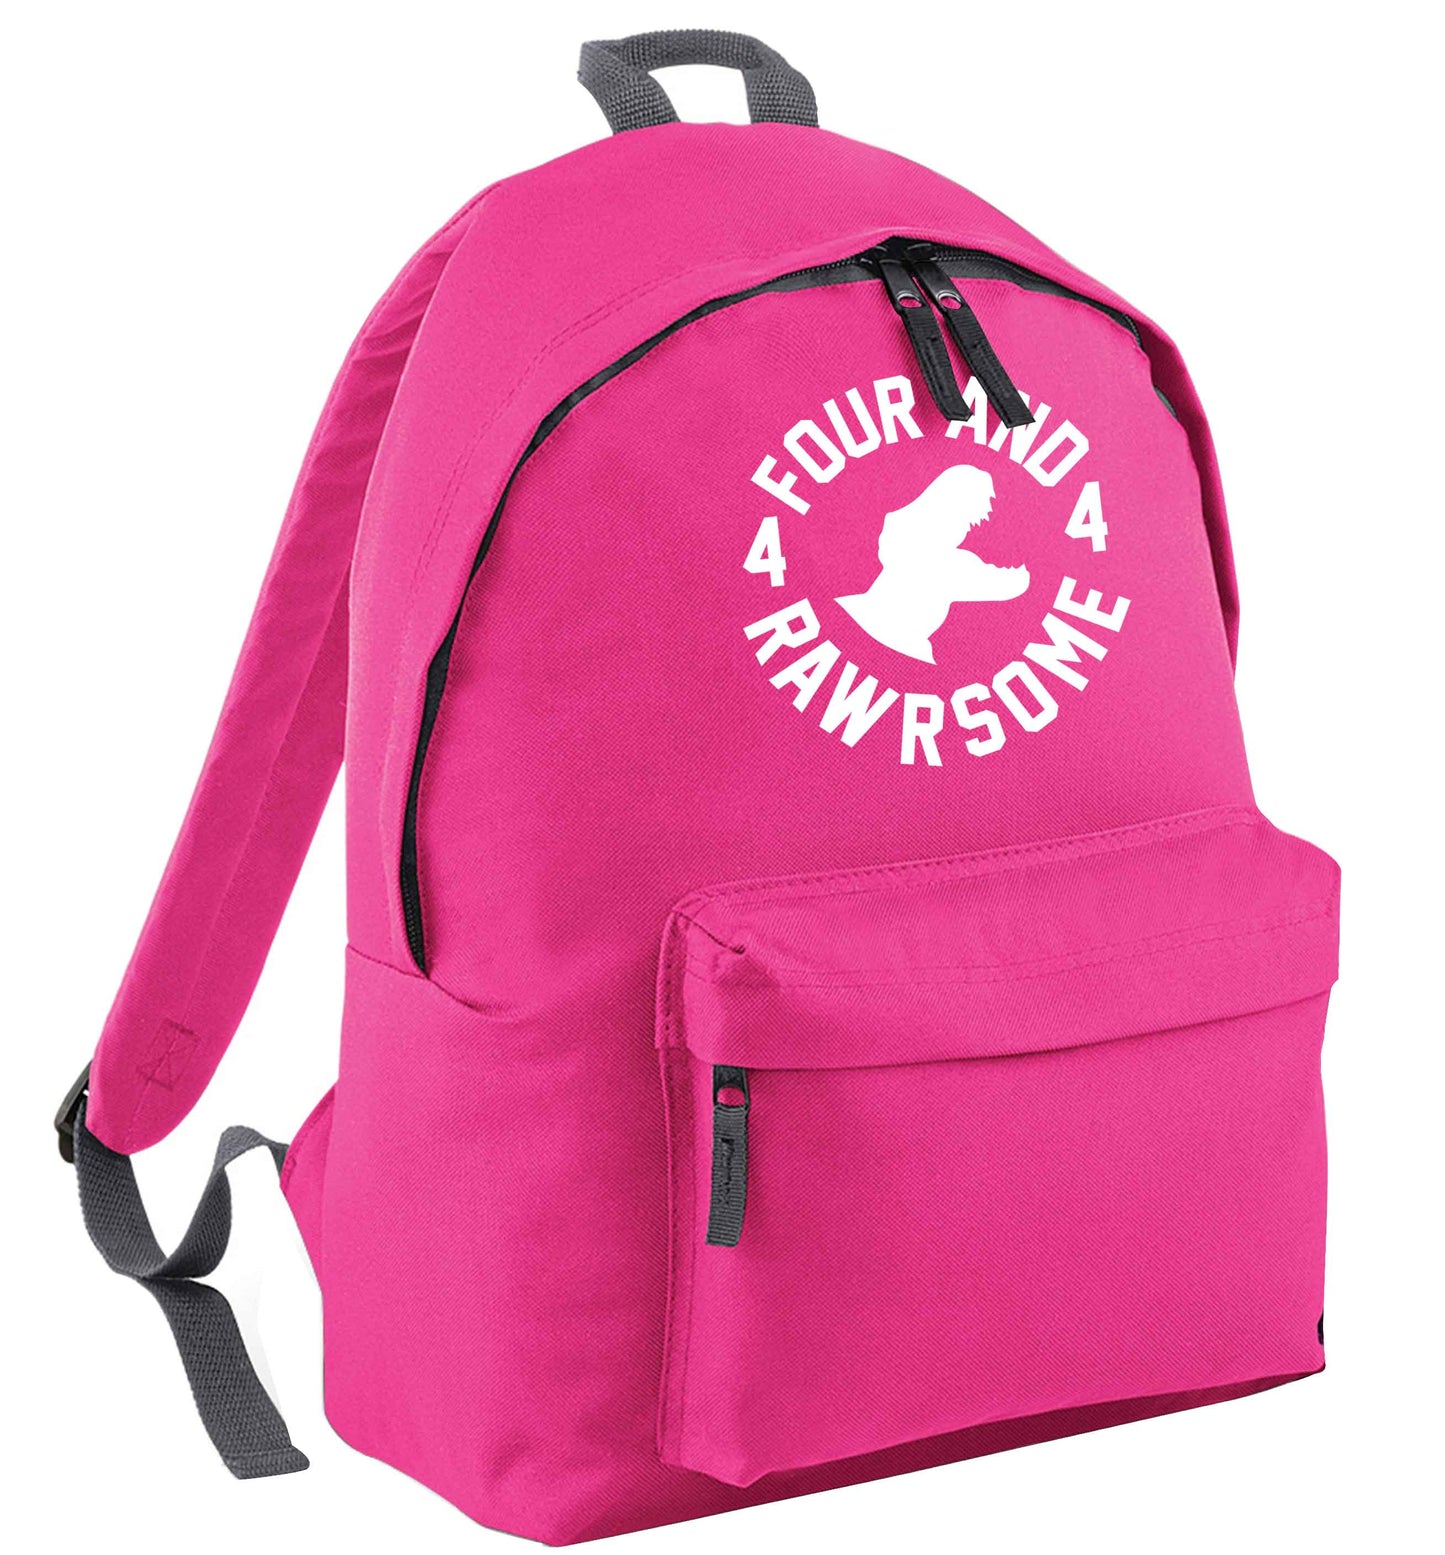 Four and rawrsome pink childrens backpack